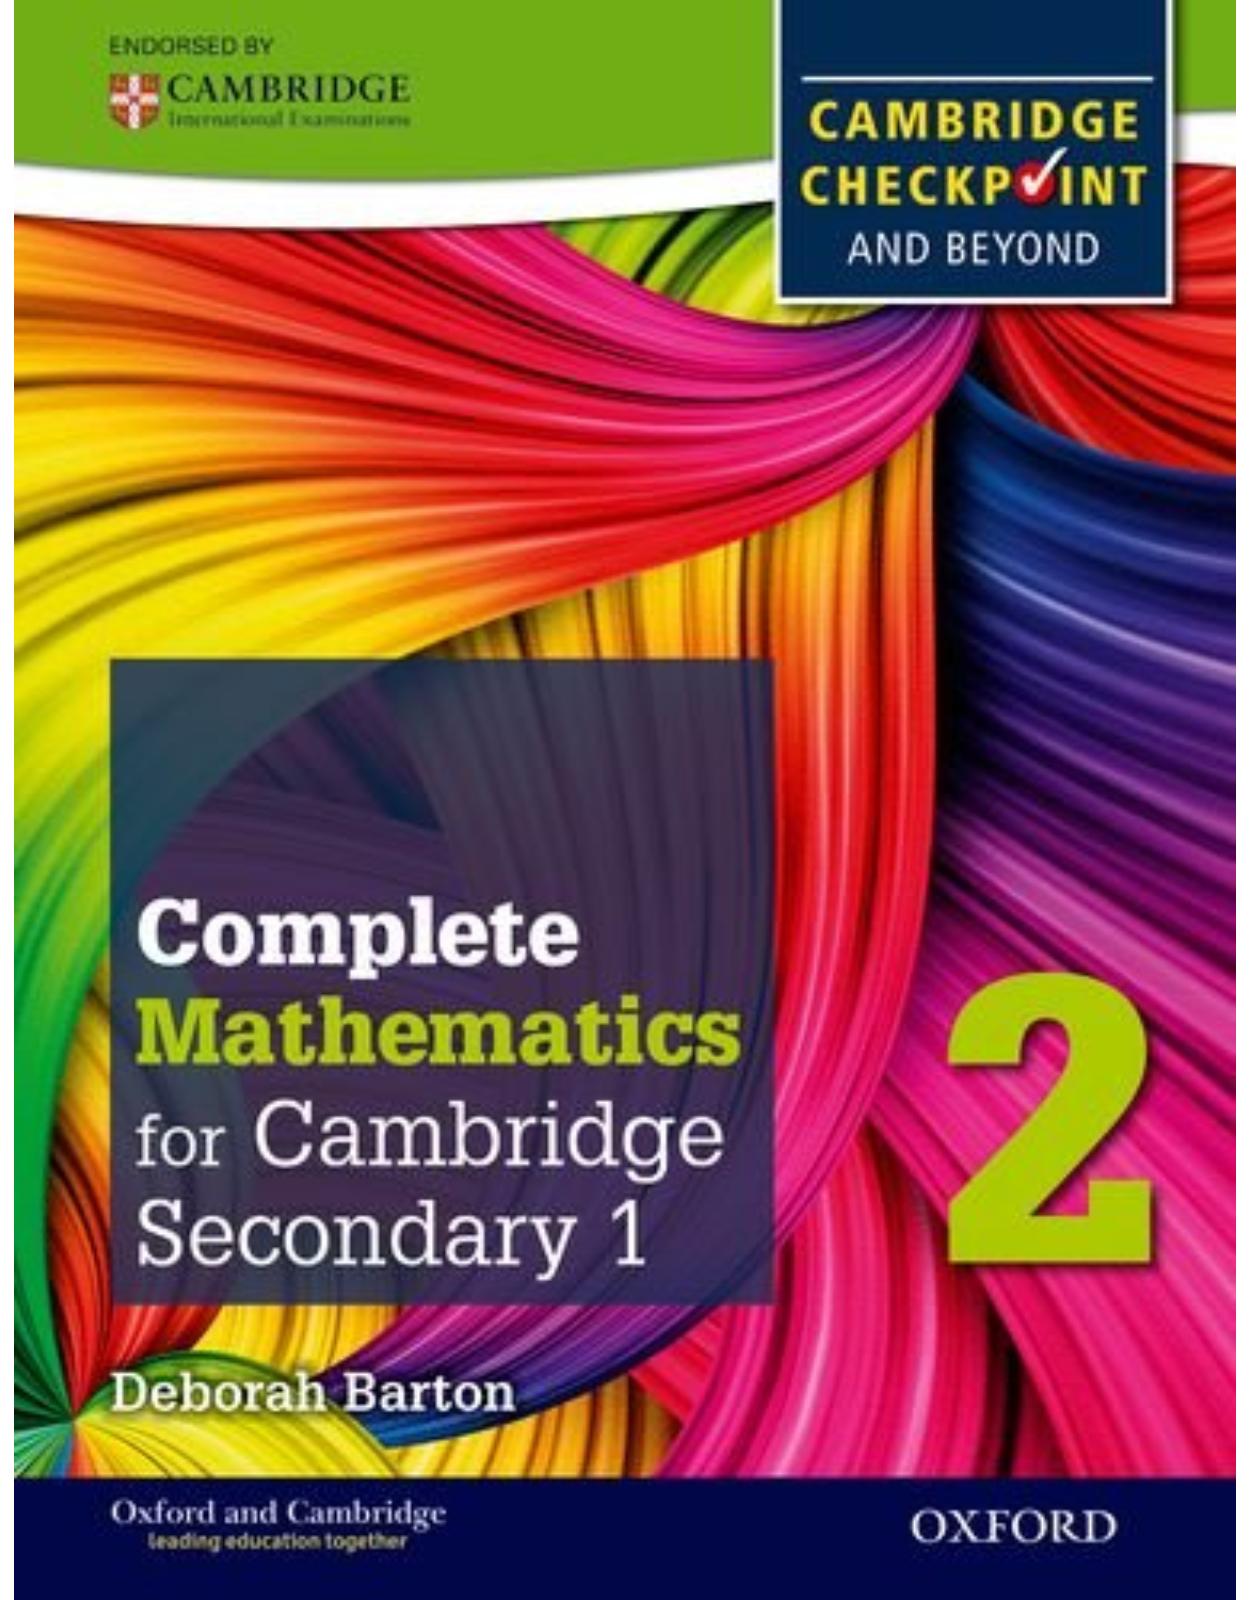 Complete Mathematics for Cambridge Secondary 1 Student Book 2: For Cambridge Checkpoint and beyond